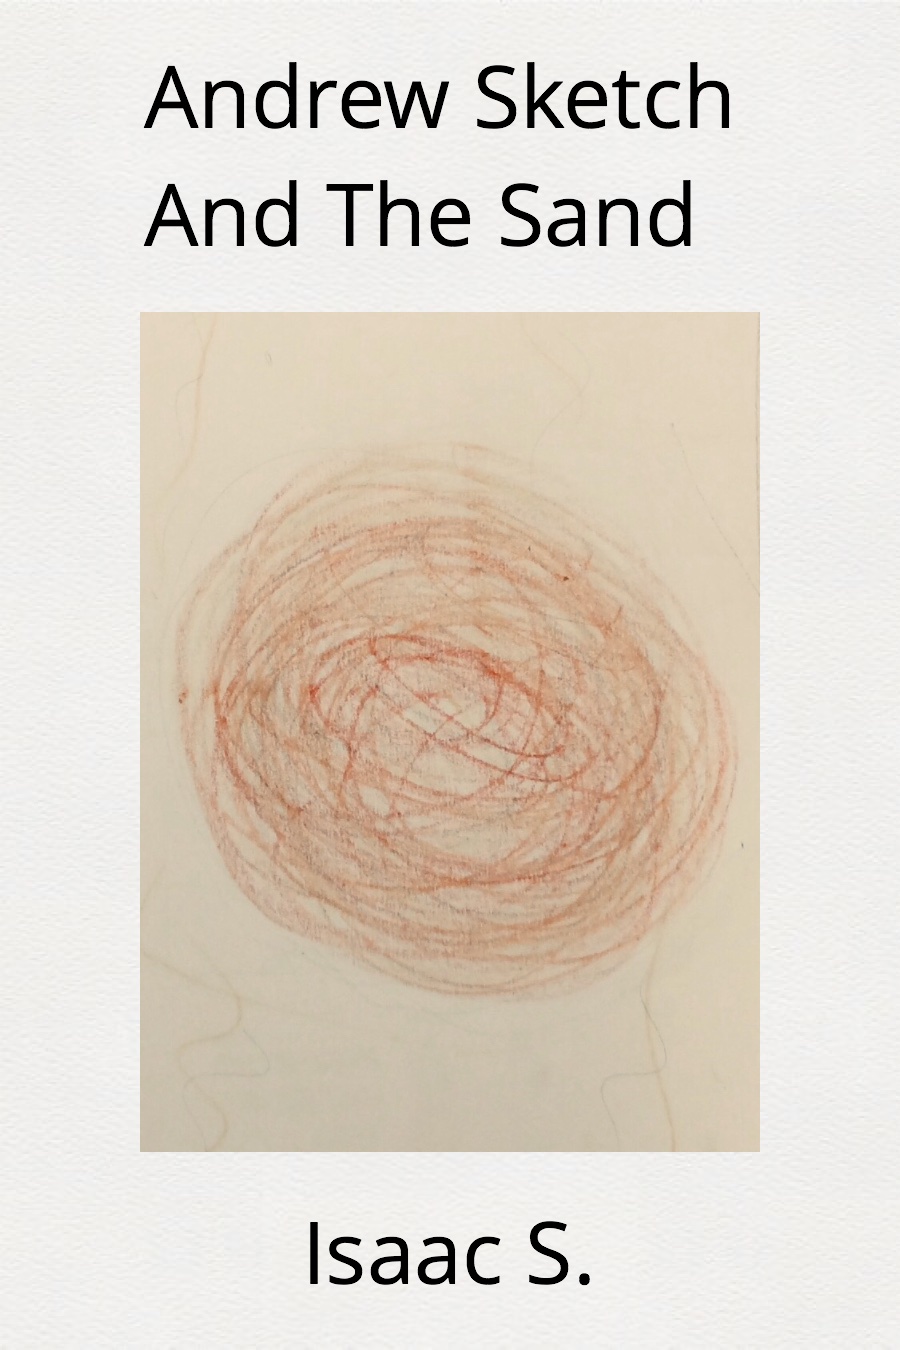 Andrew Sketch And The Sand by Isaac S